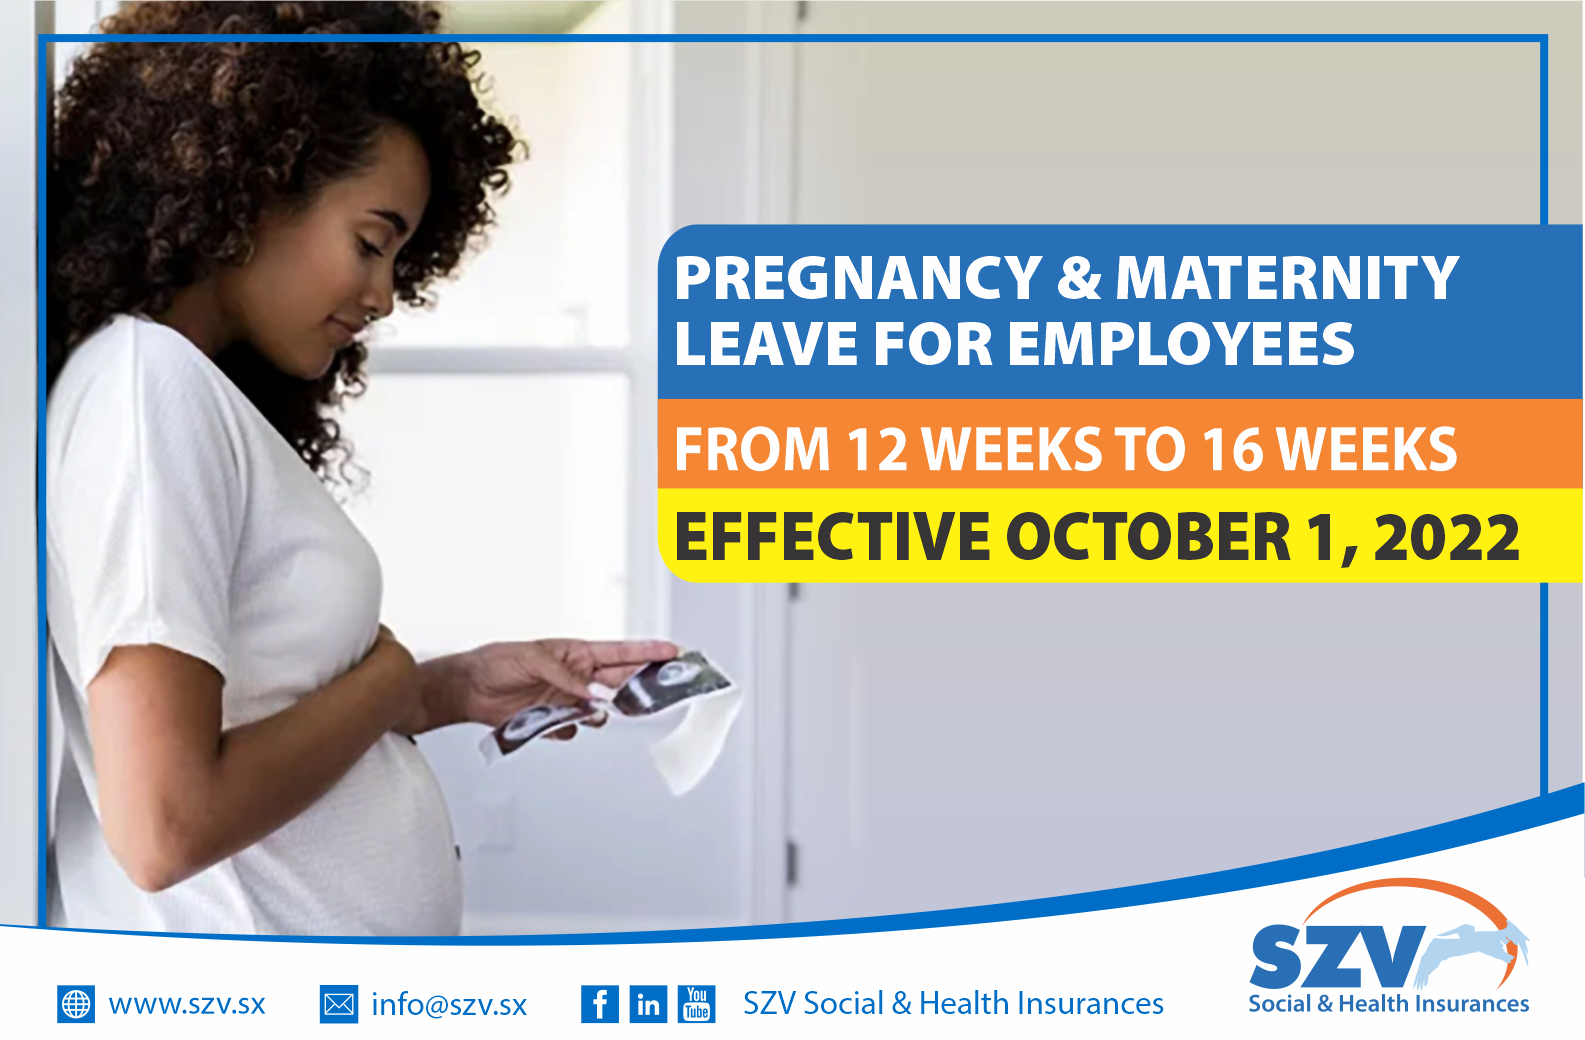 Pregnancy & Maternity Leave for Employees